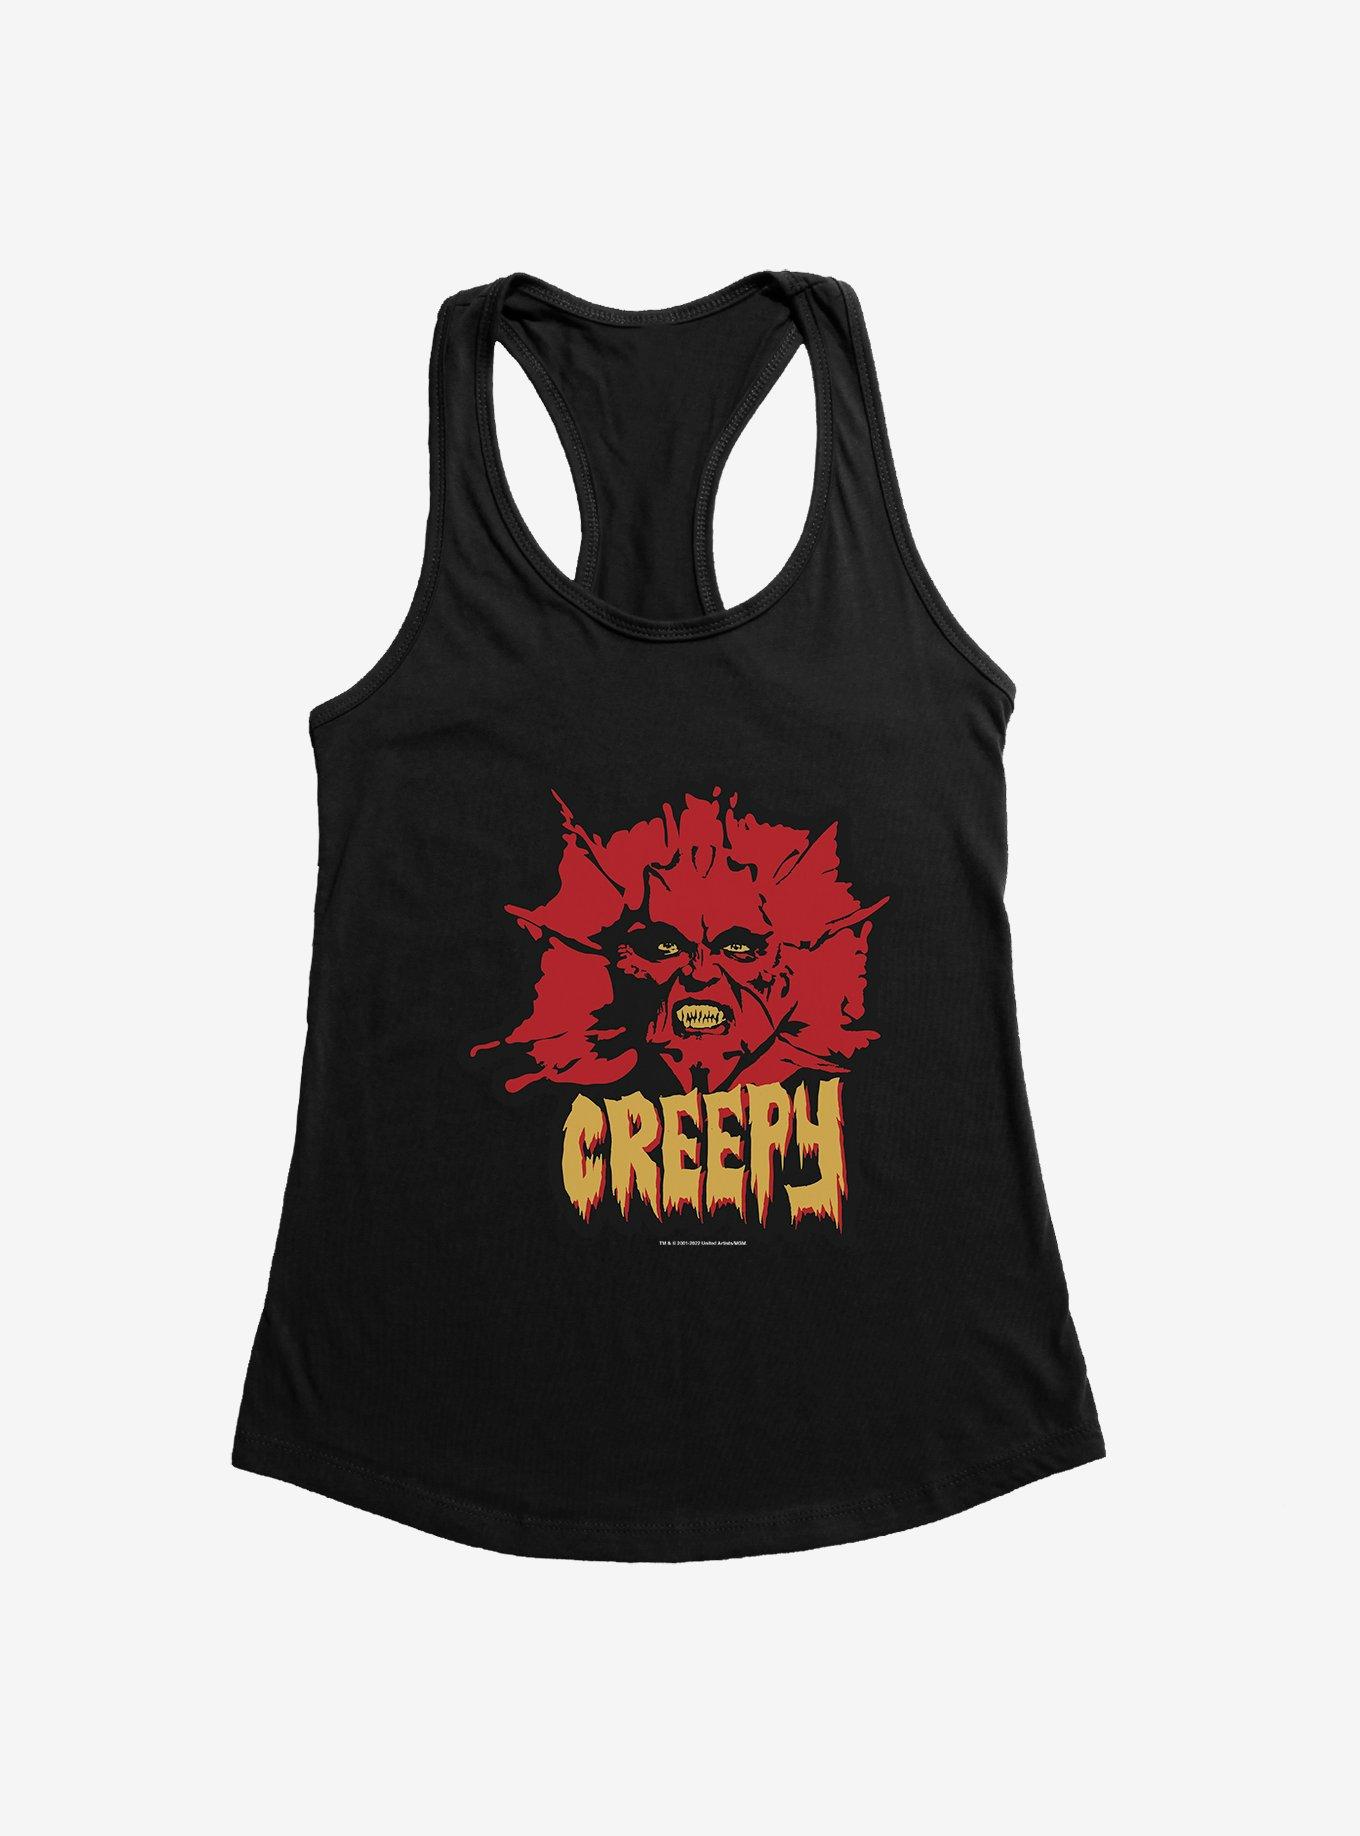 Jeepers Creepers Creepy Womens Tank Top, BLACK, hi-res